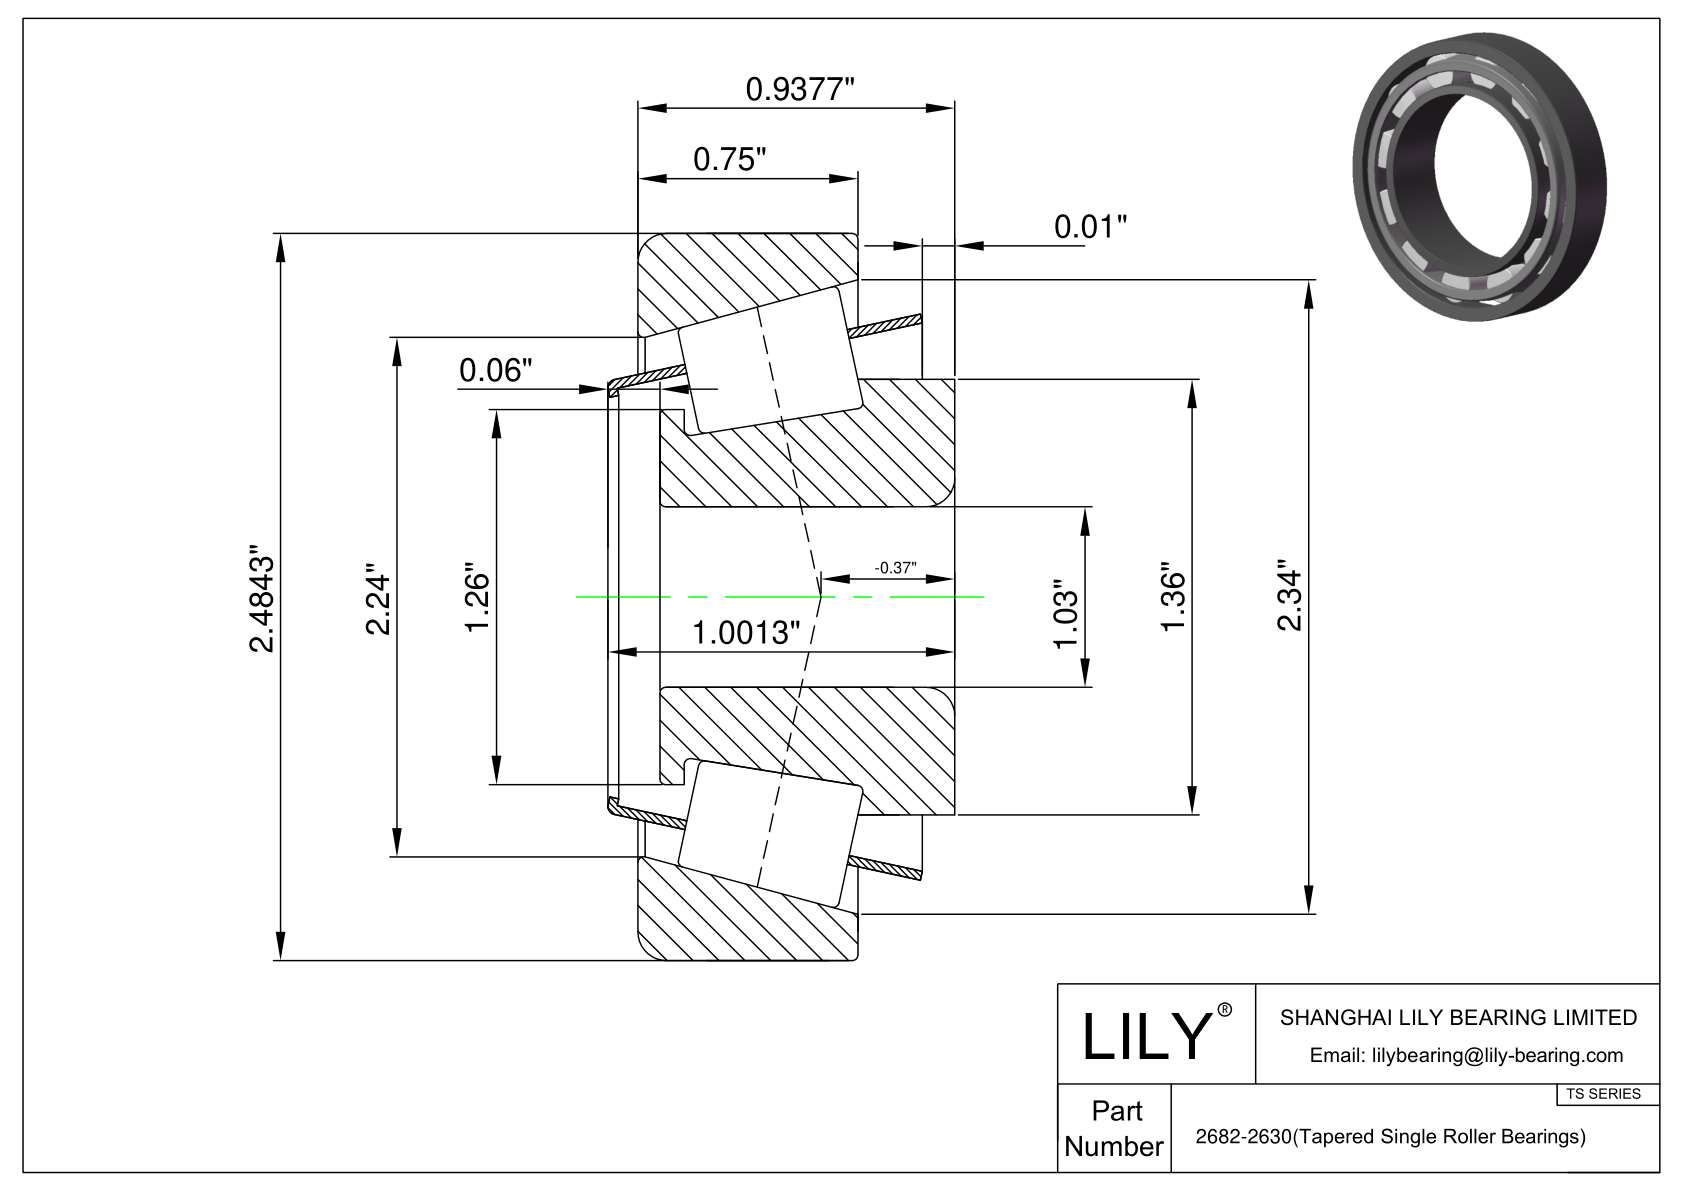 2682-2630 TS (Tapered Single Roller Bearings) (Imperial) cad drawing